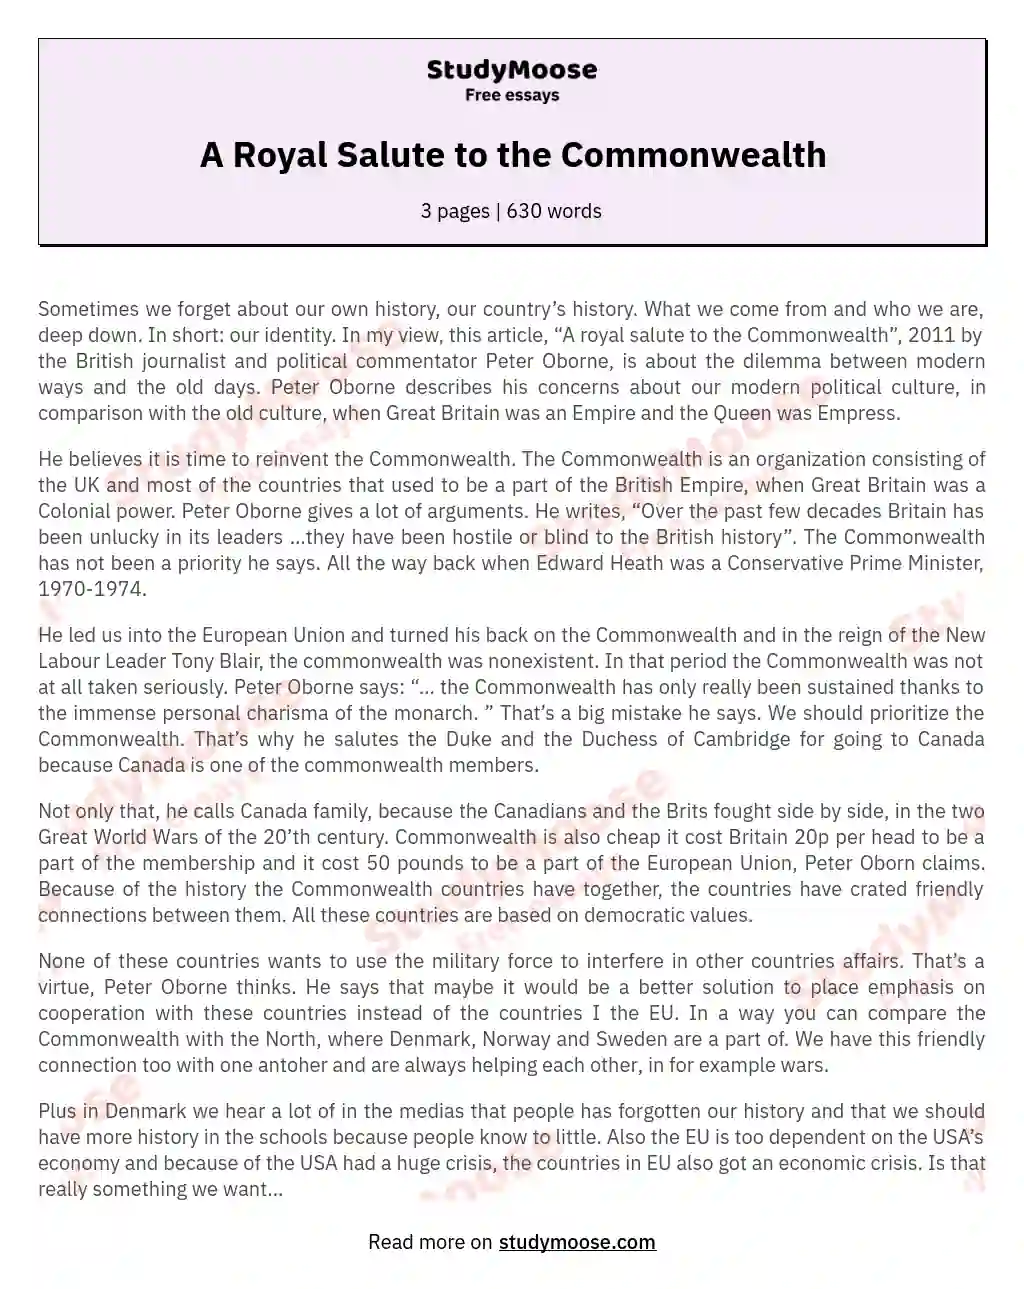 A Royal Salute to the Commonwealth essay